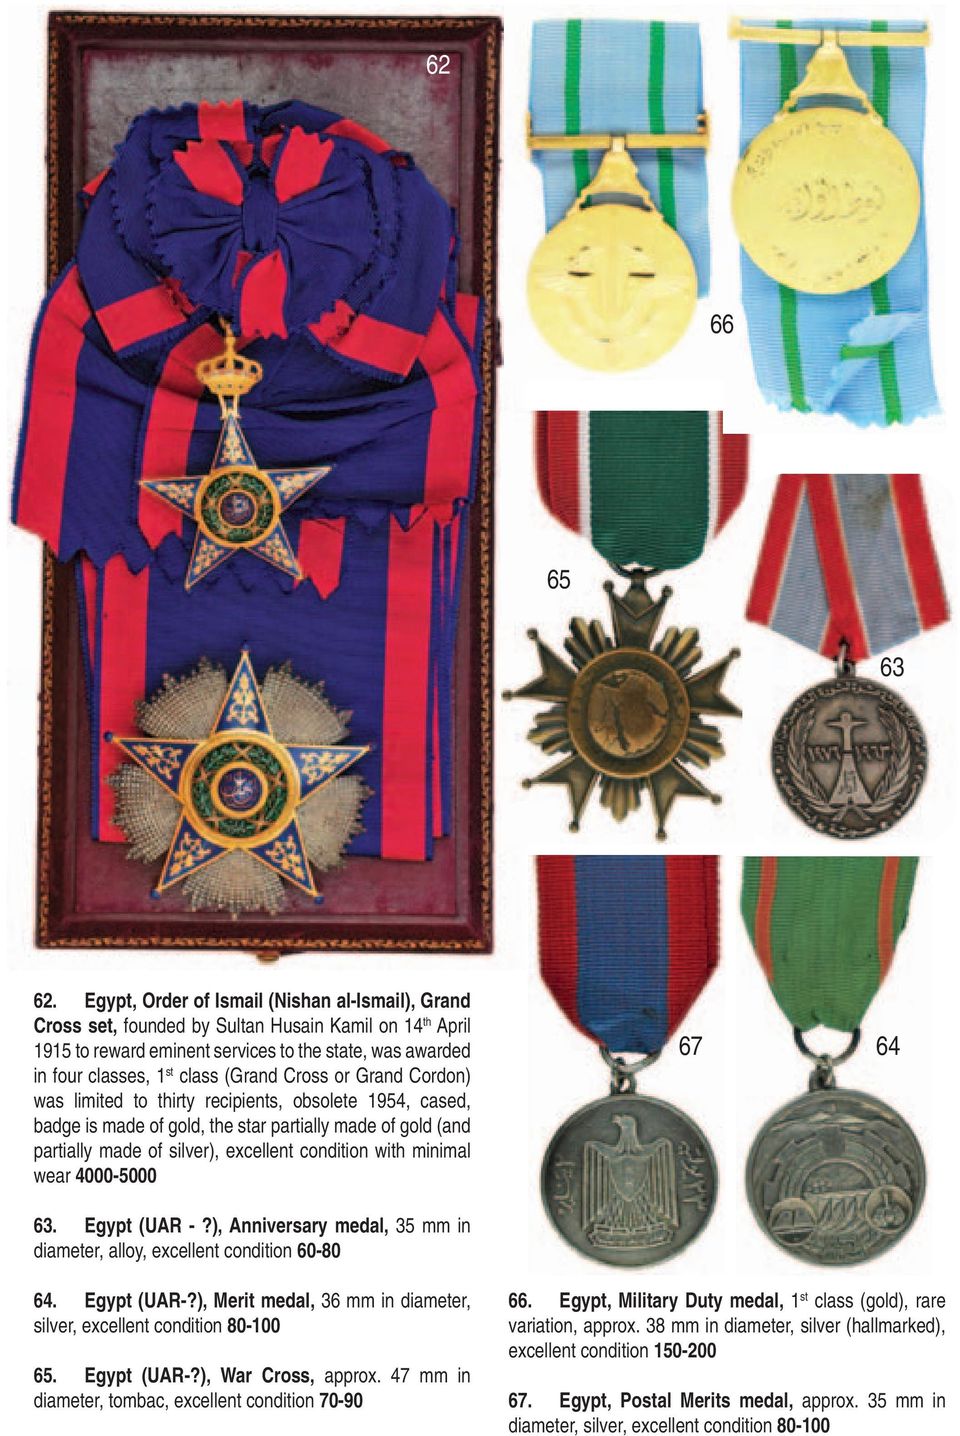 Cross or Grand Cordon) was limited to thirty recipients, obsolete 1954, cased, badge is made of gold, the star partially made of gold (and partially made of silver), excellent condition with minimal